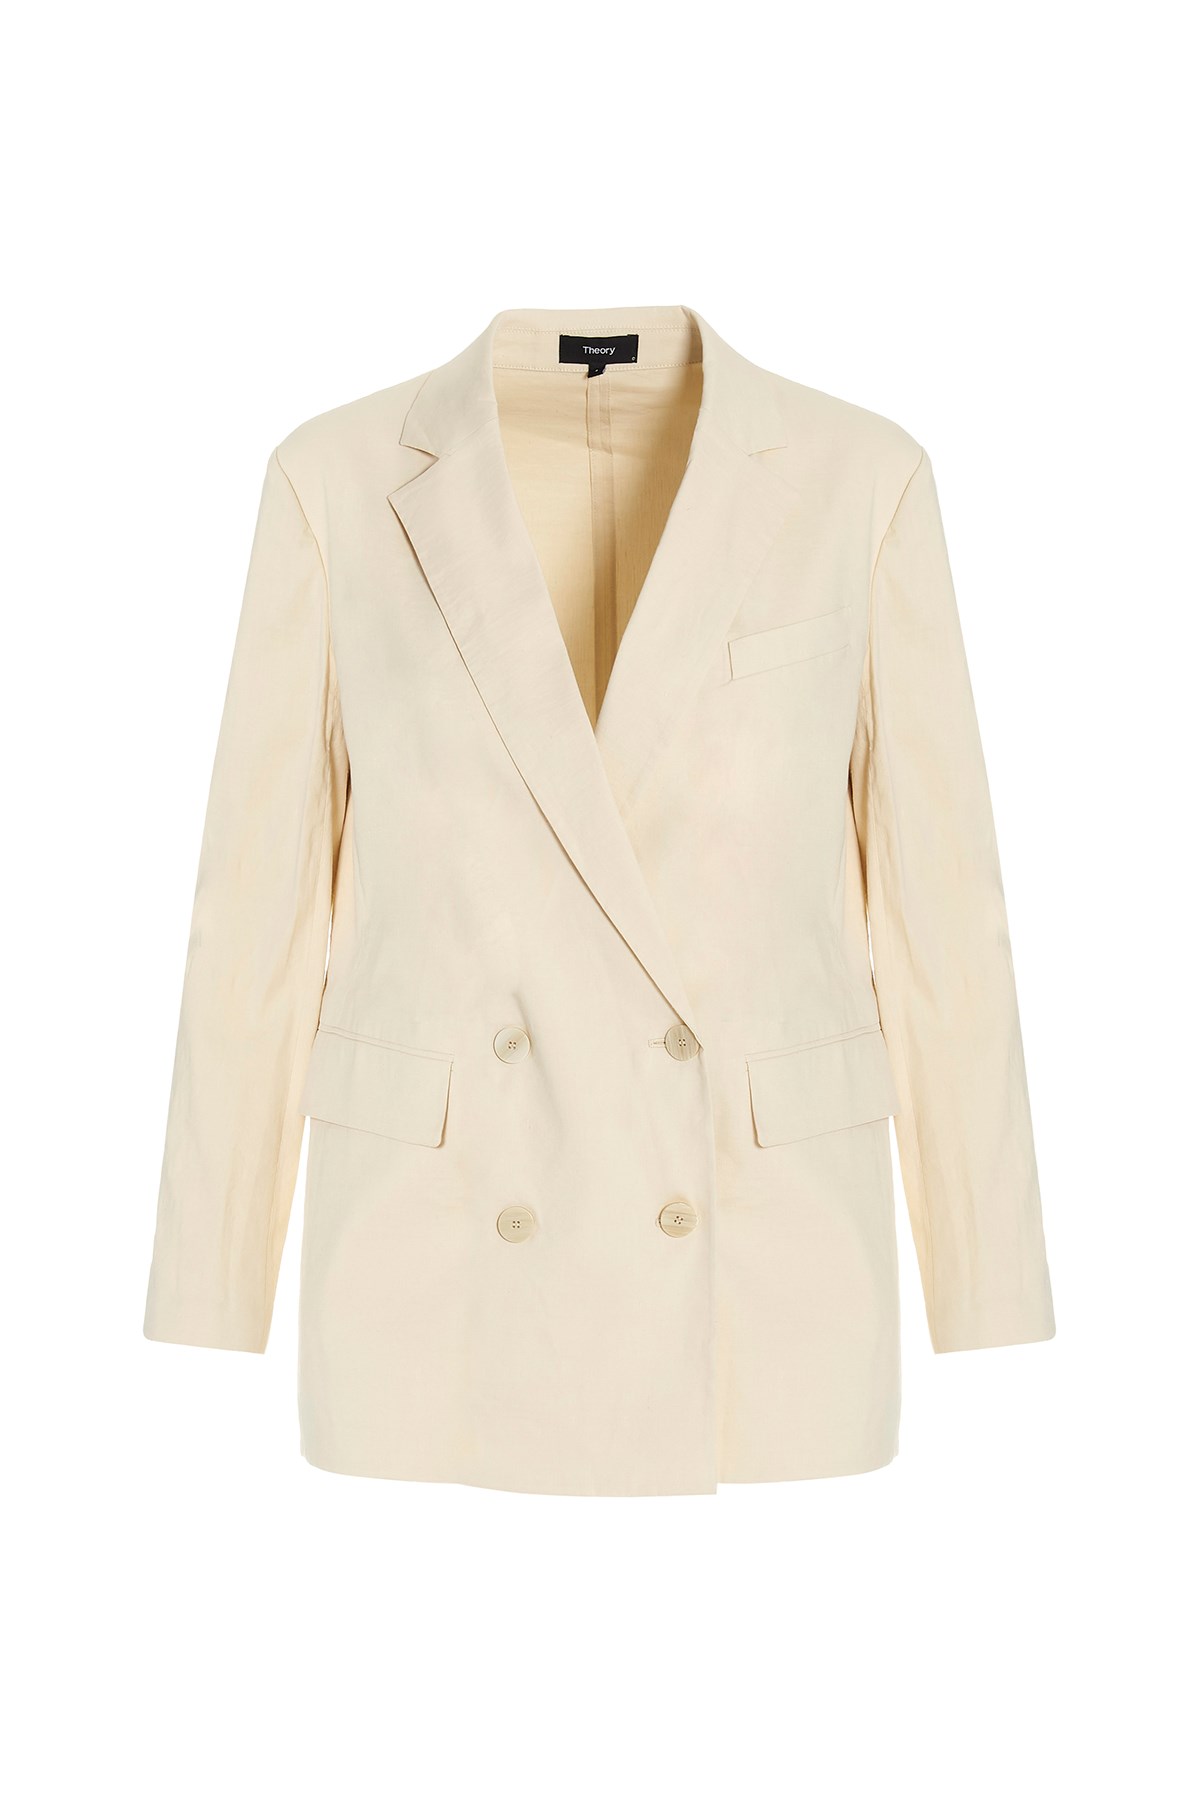 THEORY Double-Breasted Linen Blazer Jacket